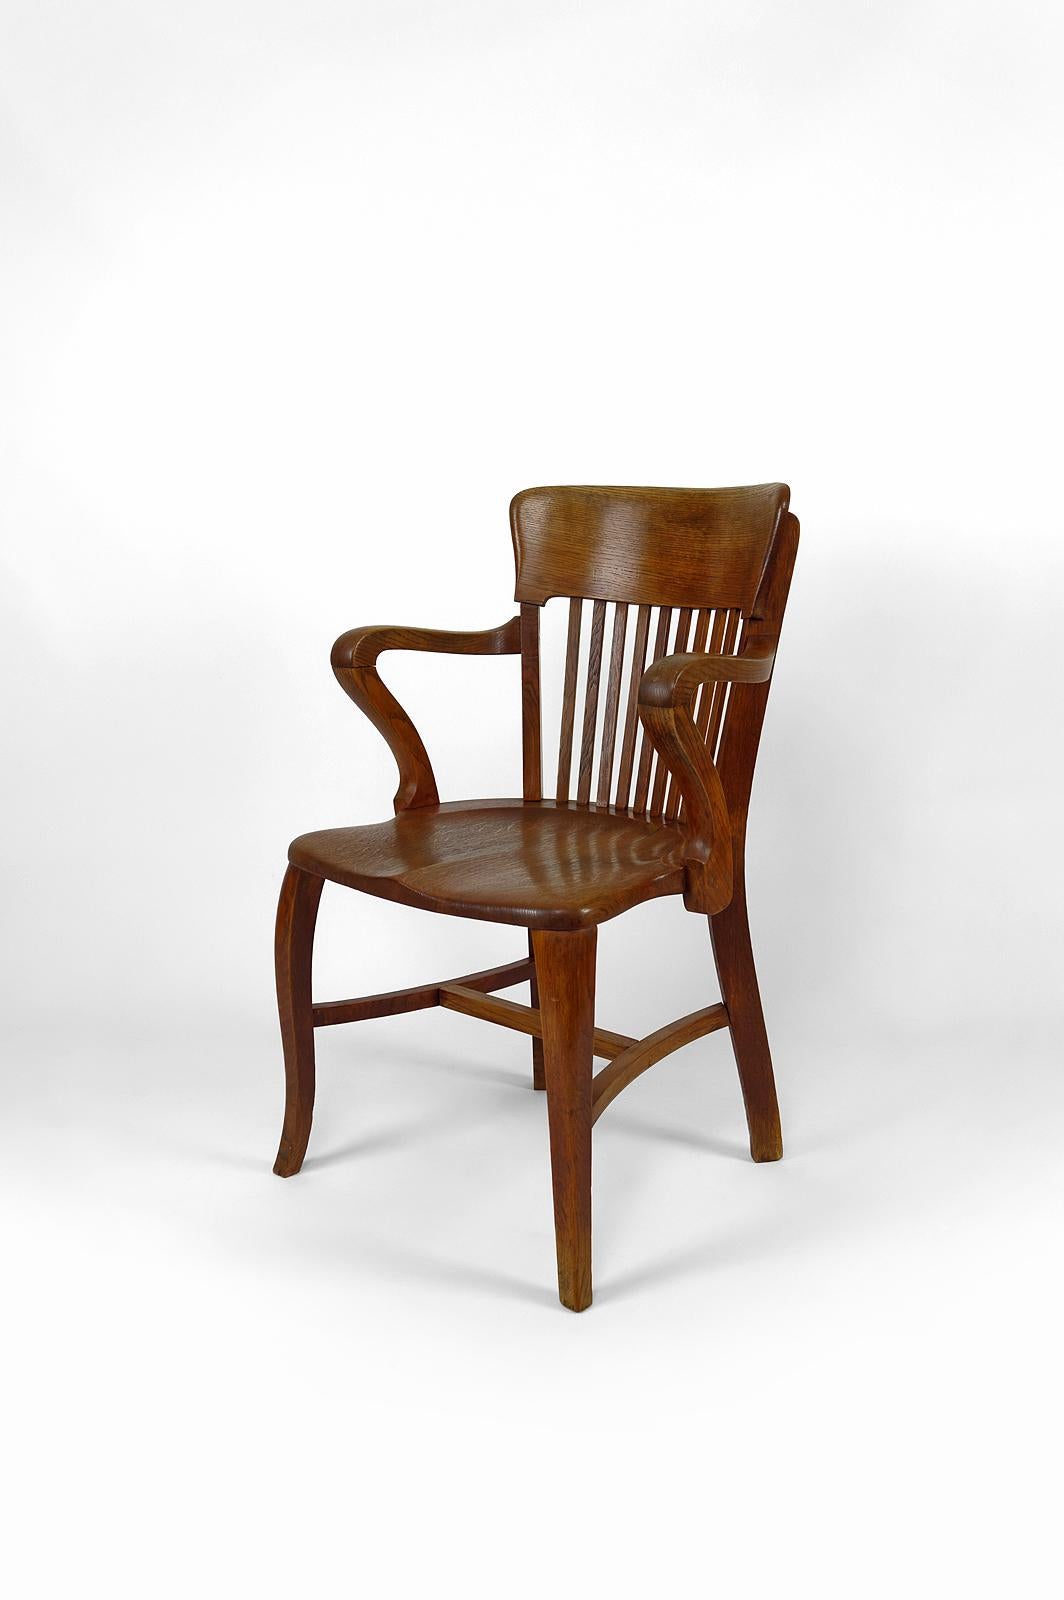 American oak office armchair.
USA, circa 1900
Industrial style, Belle Epoque, Victorian, Art Nouveau

In good condition.

Dimensions:
height 87 cm
width 56 cm
depth 50 cm
seat height 44 cm